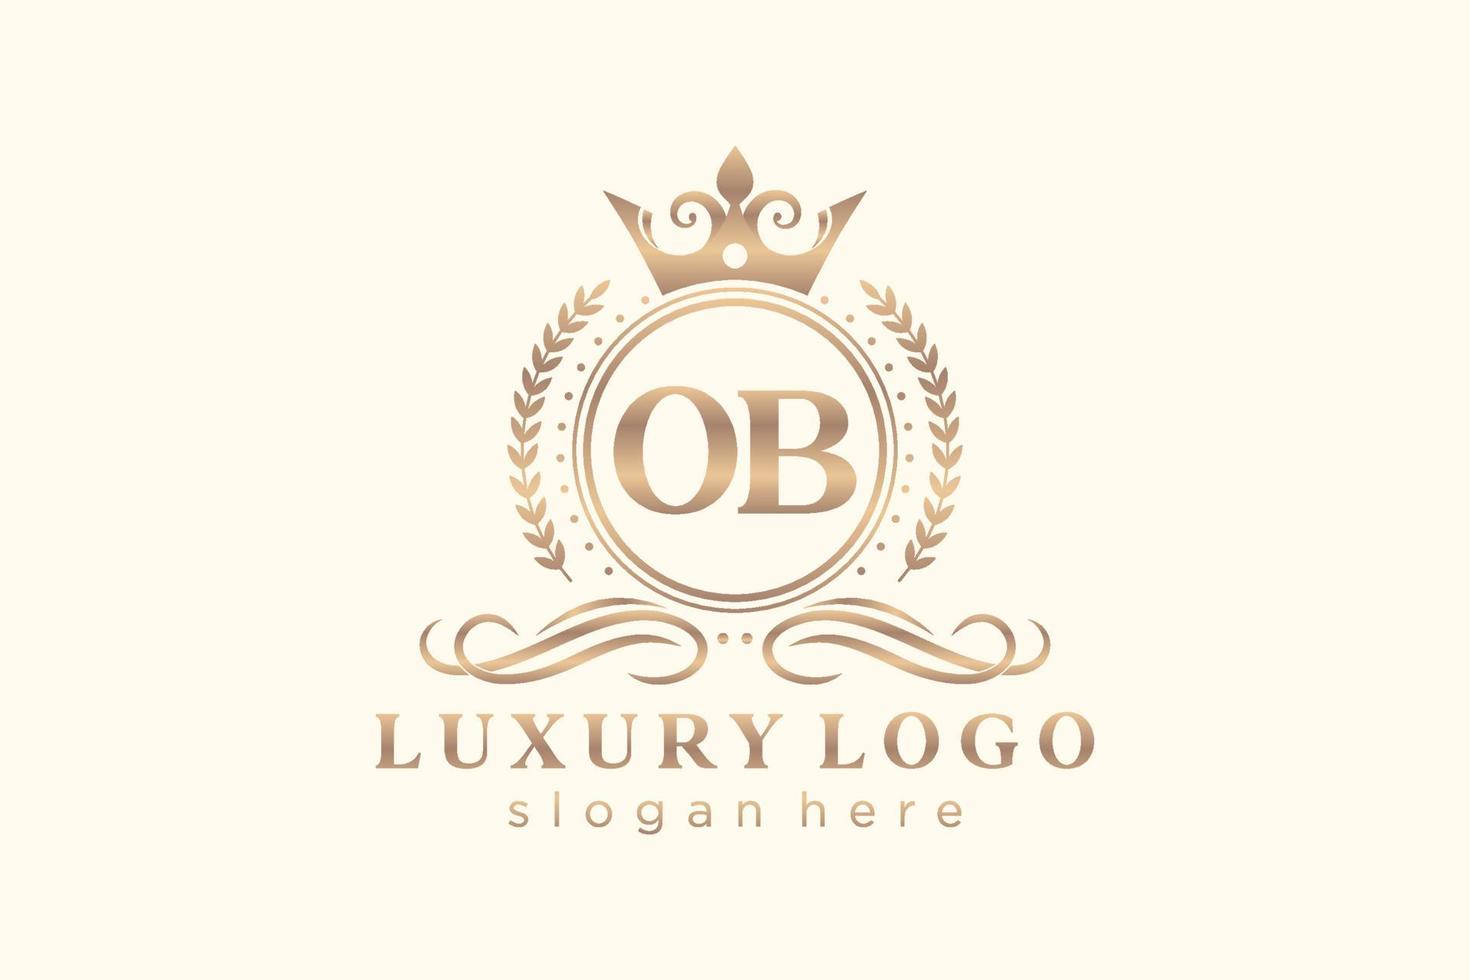 Initial OB Letter Royal Luxury Logo template in vector art for Restaurant, Royalty, Boutique, Cafe, Hotel, Heraldic, Jewelry, Fashion and other vector illustration.